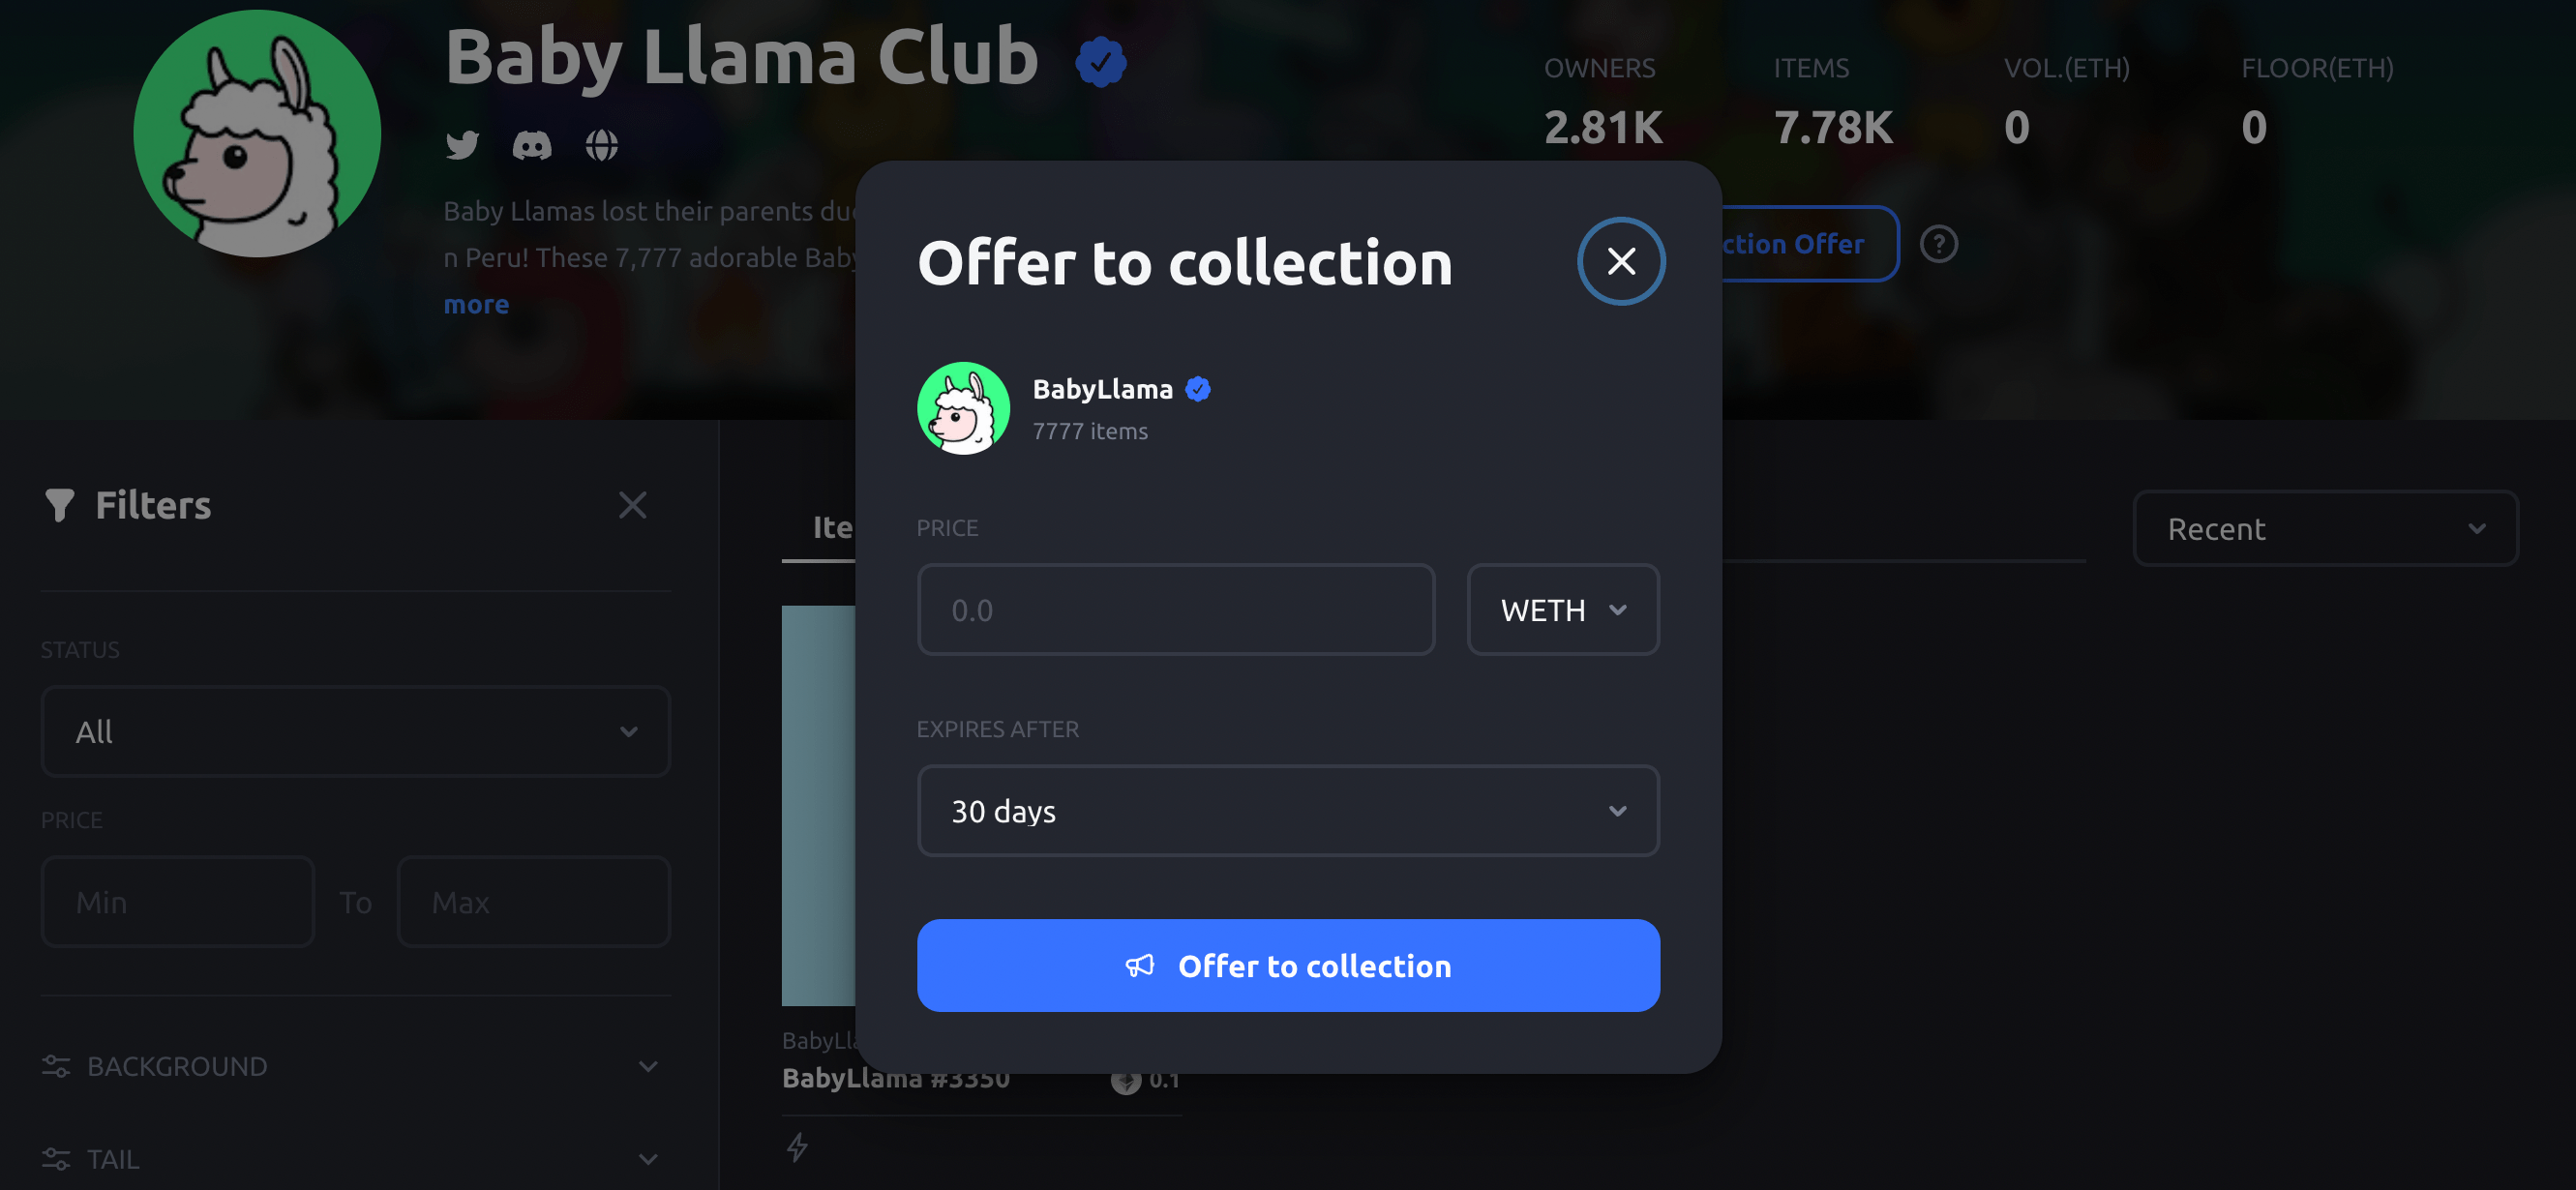 Collection offer dialogue